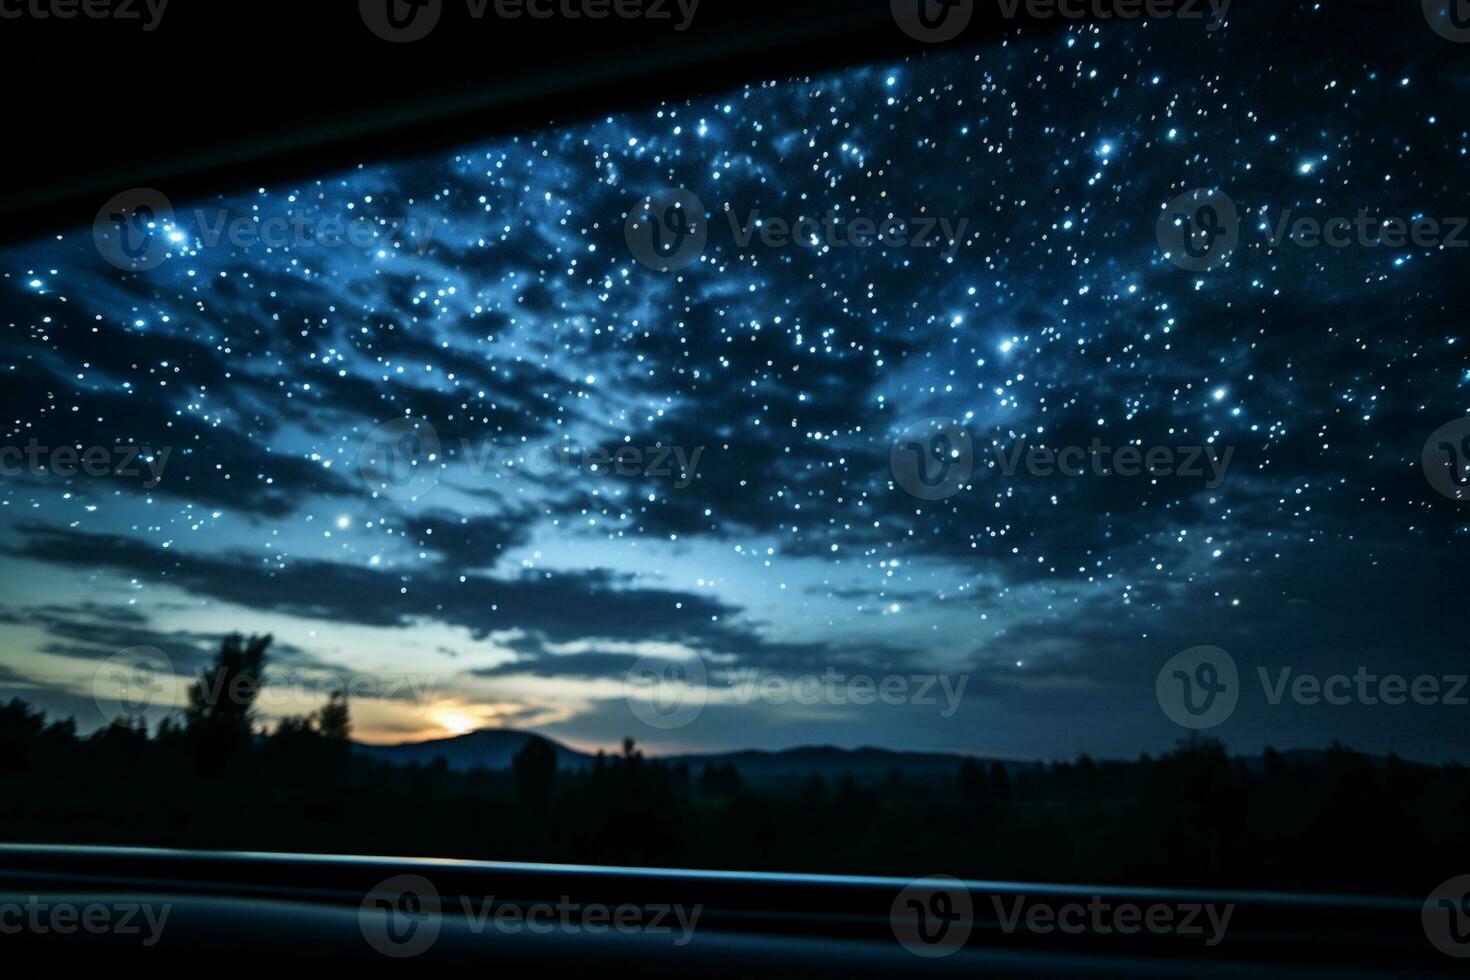 Starry night skies viewed through vans rooftop window background with empty space for text photo